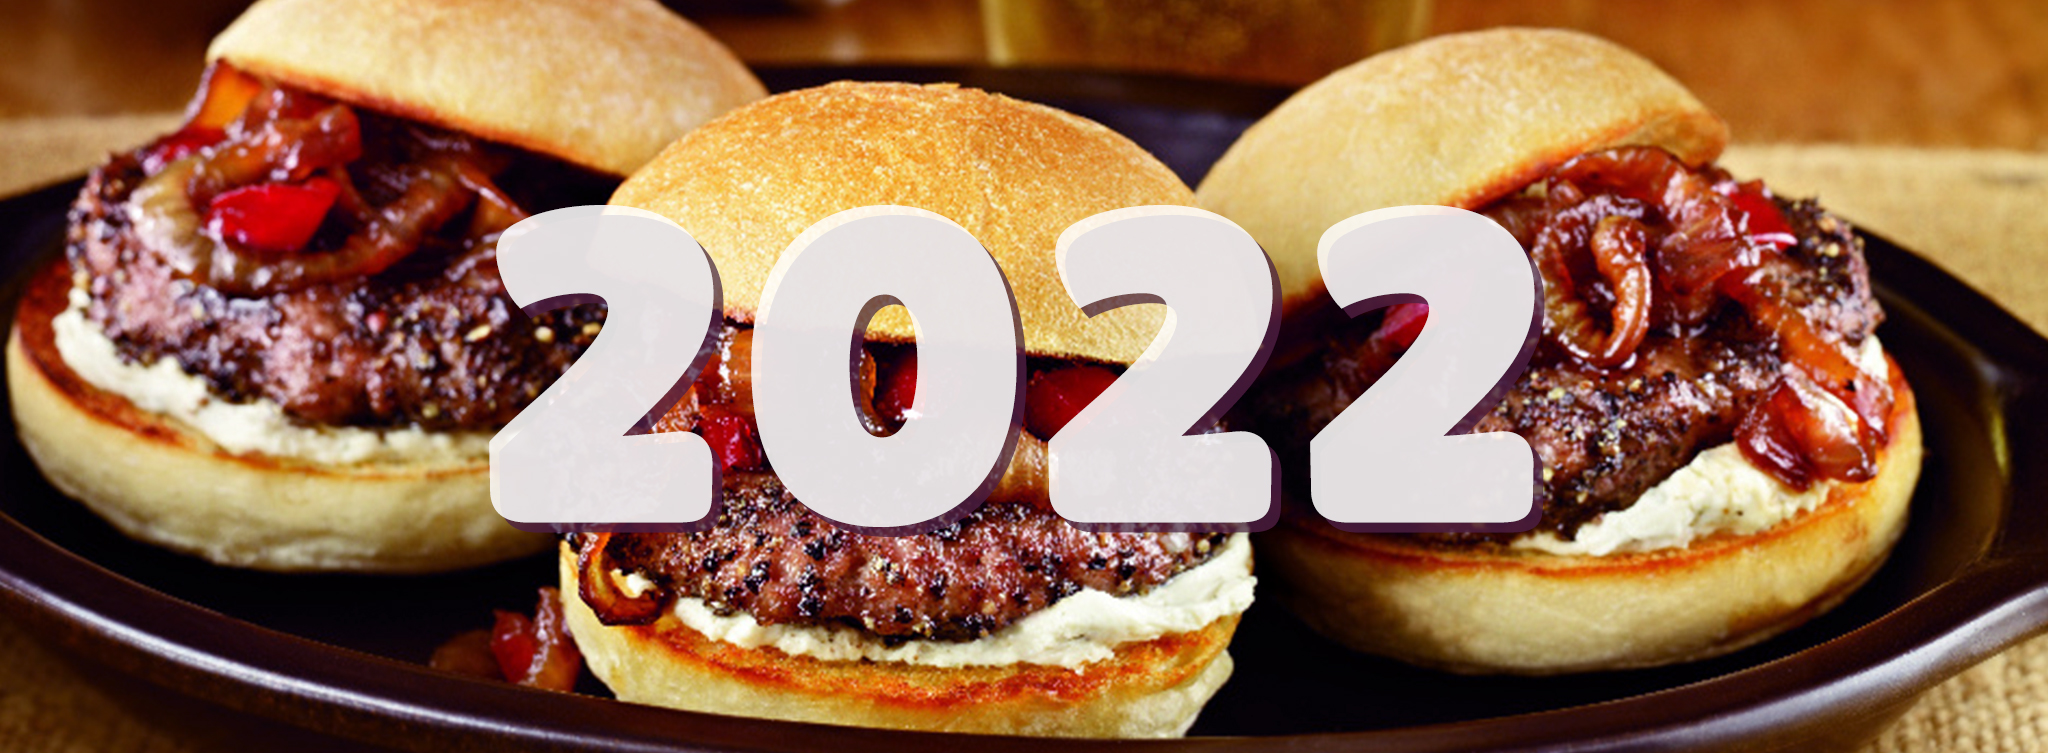 The State of Burgers in the U.S. 2022